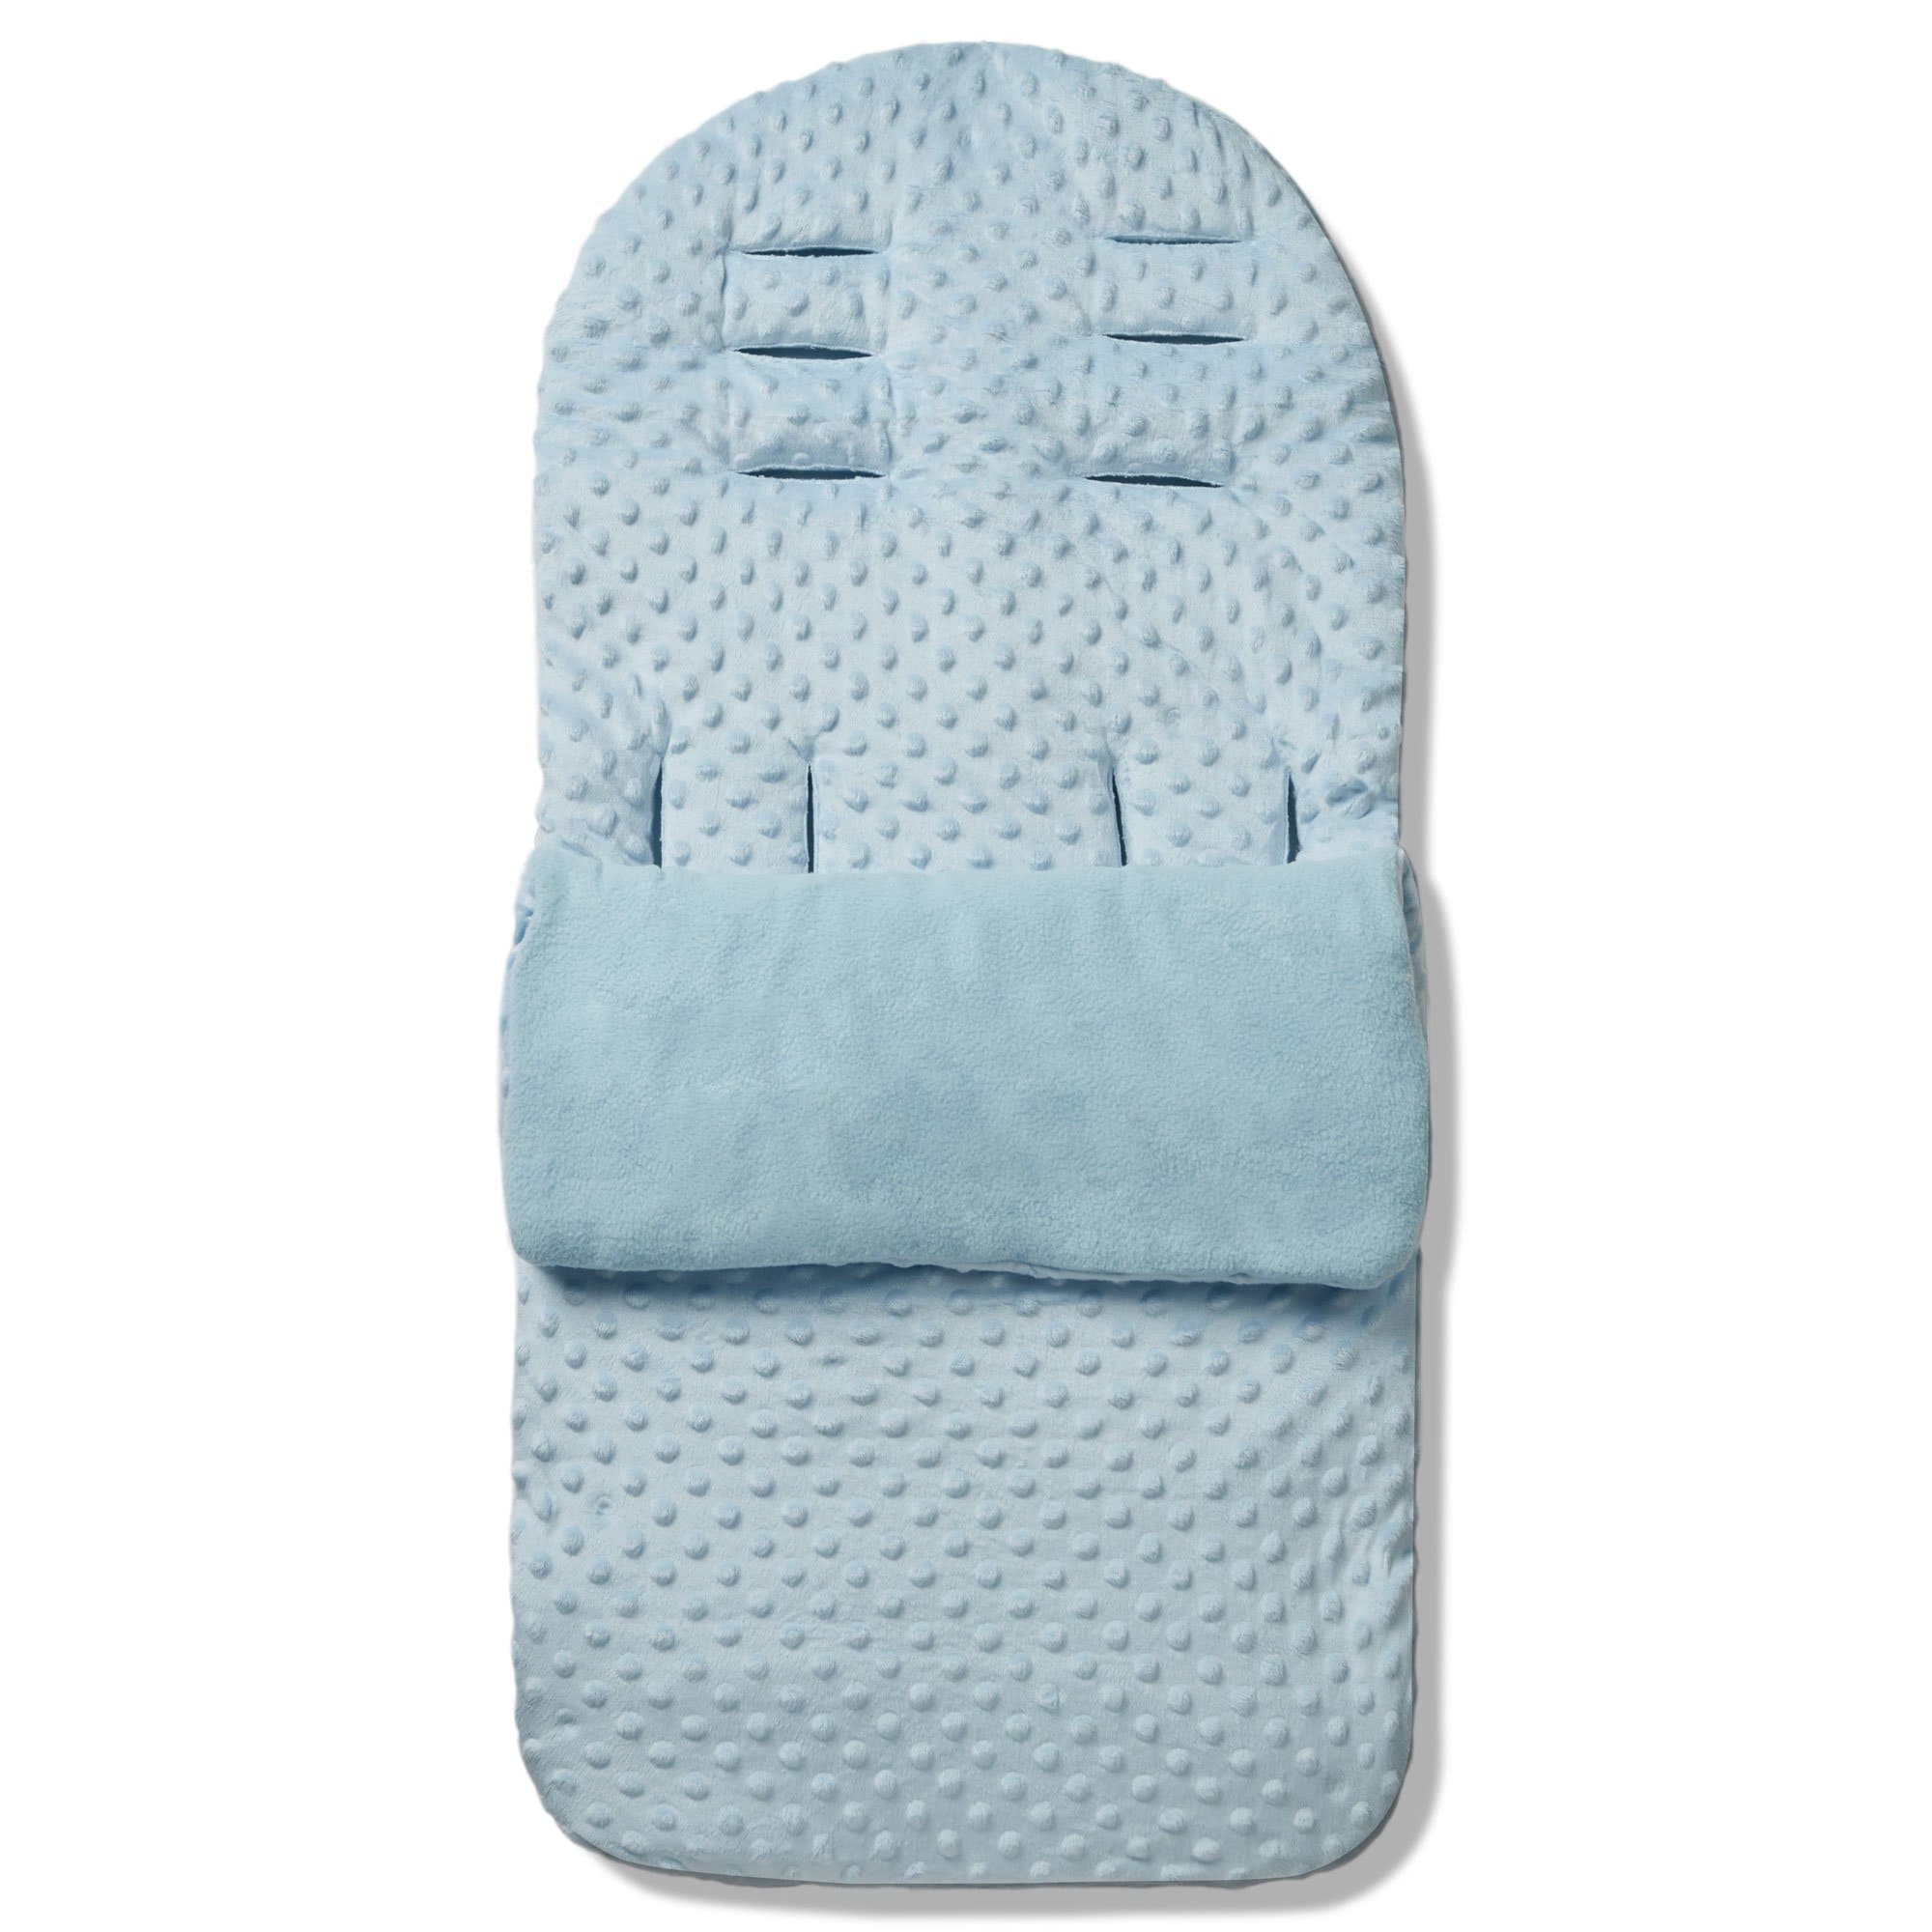 Dimple Footmuff / Cosy Toes Compatible with Maclaren - For Your Little One